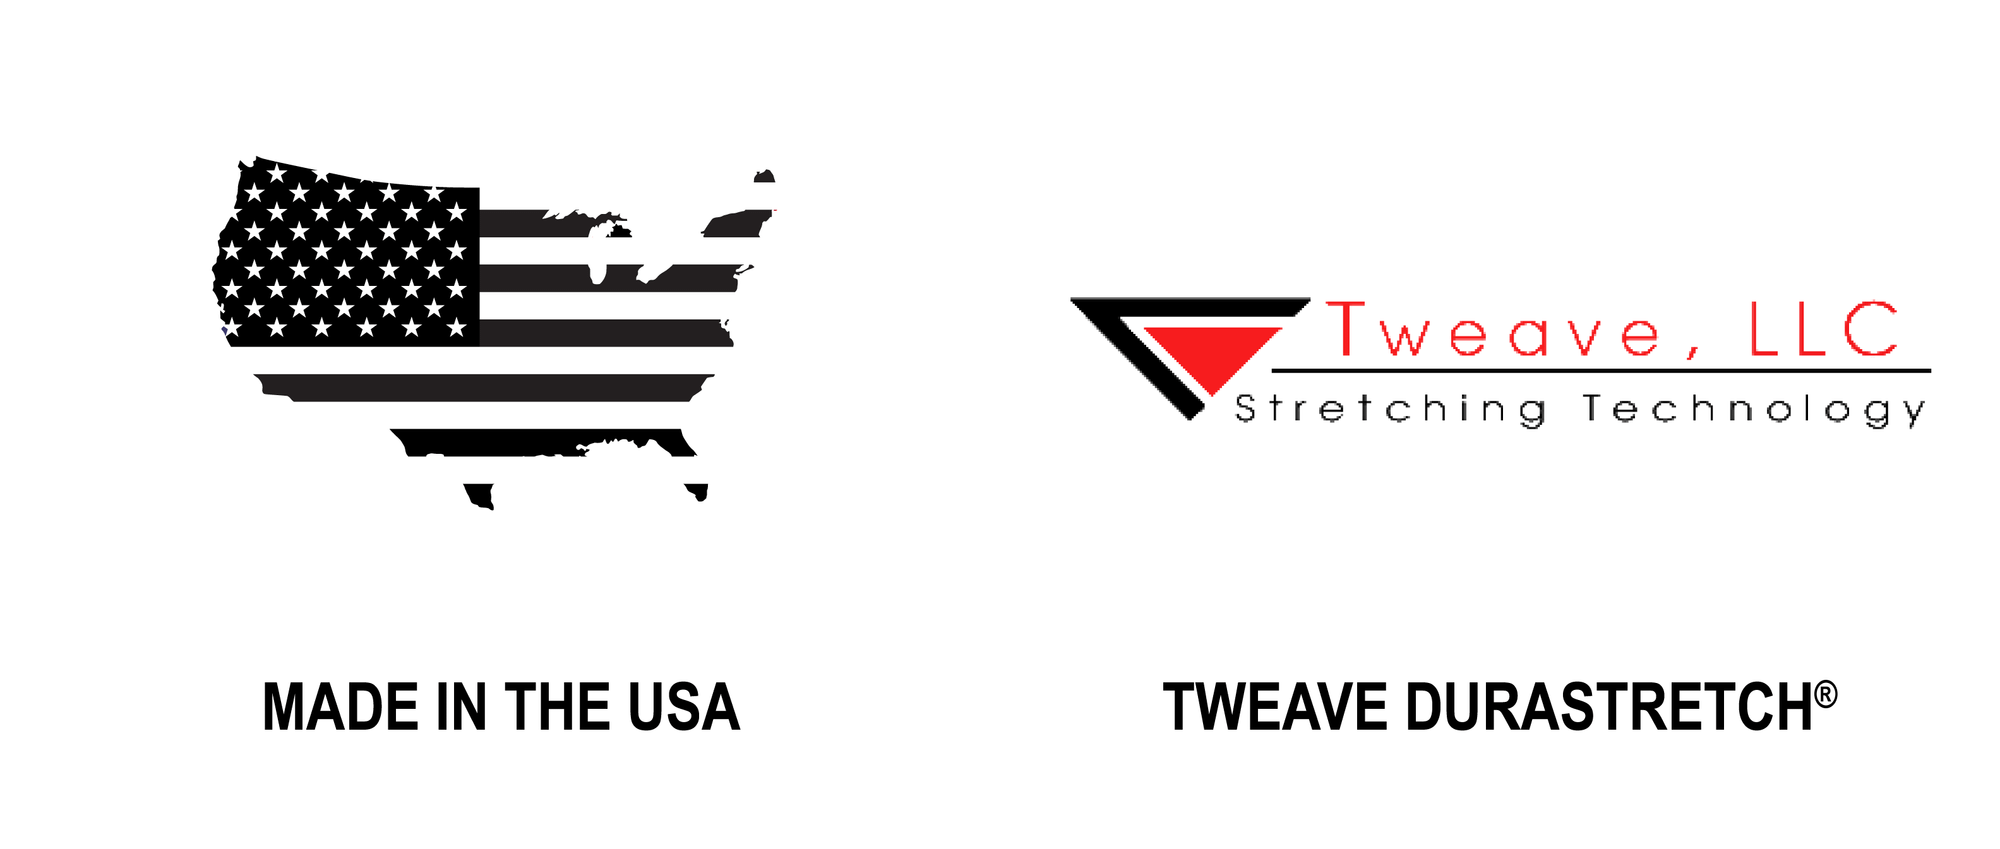 Made in the USA | Tweave Durastretch | 1620 Workwear, Inc.